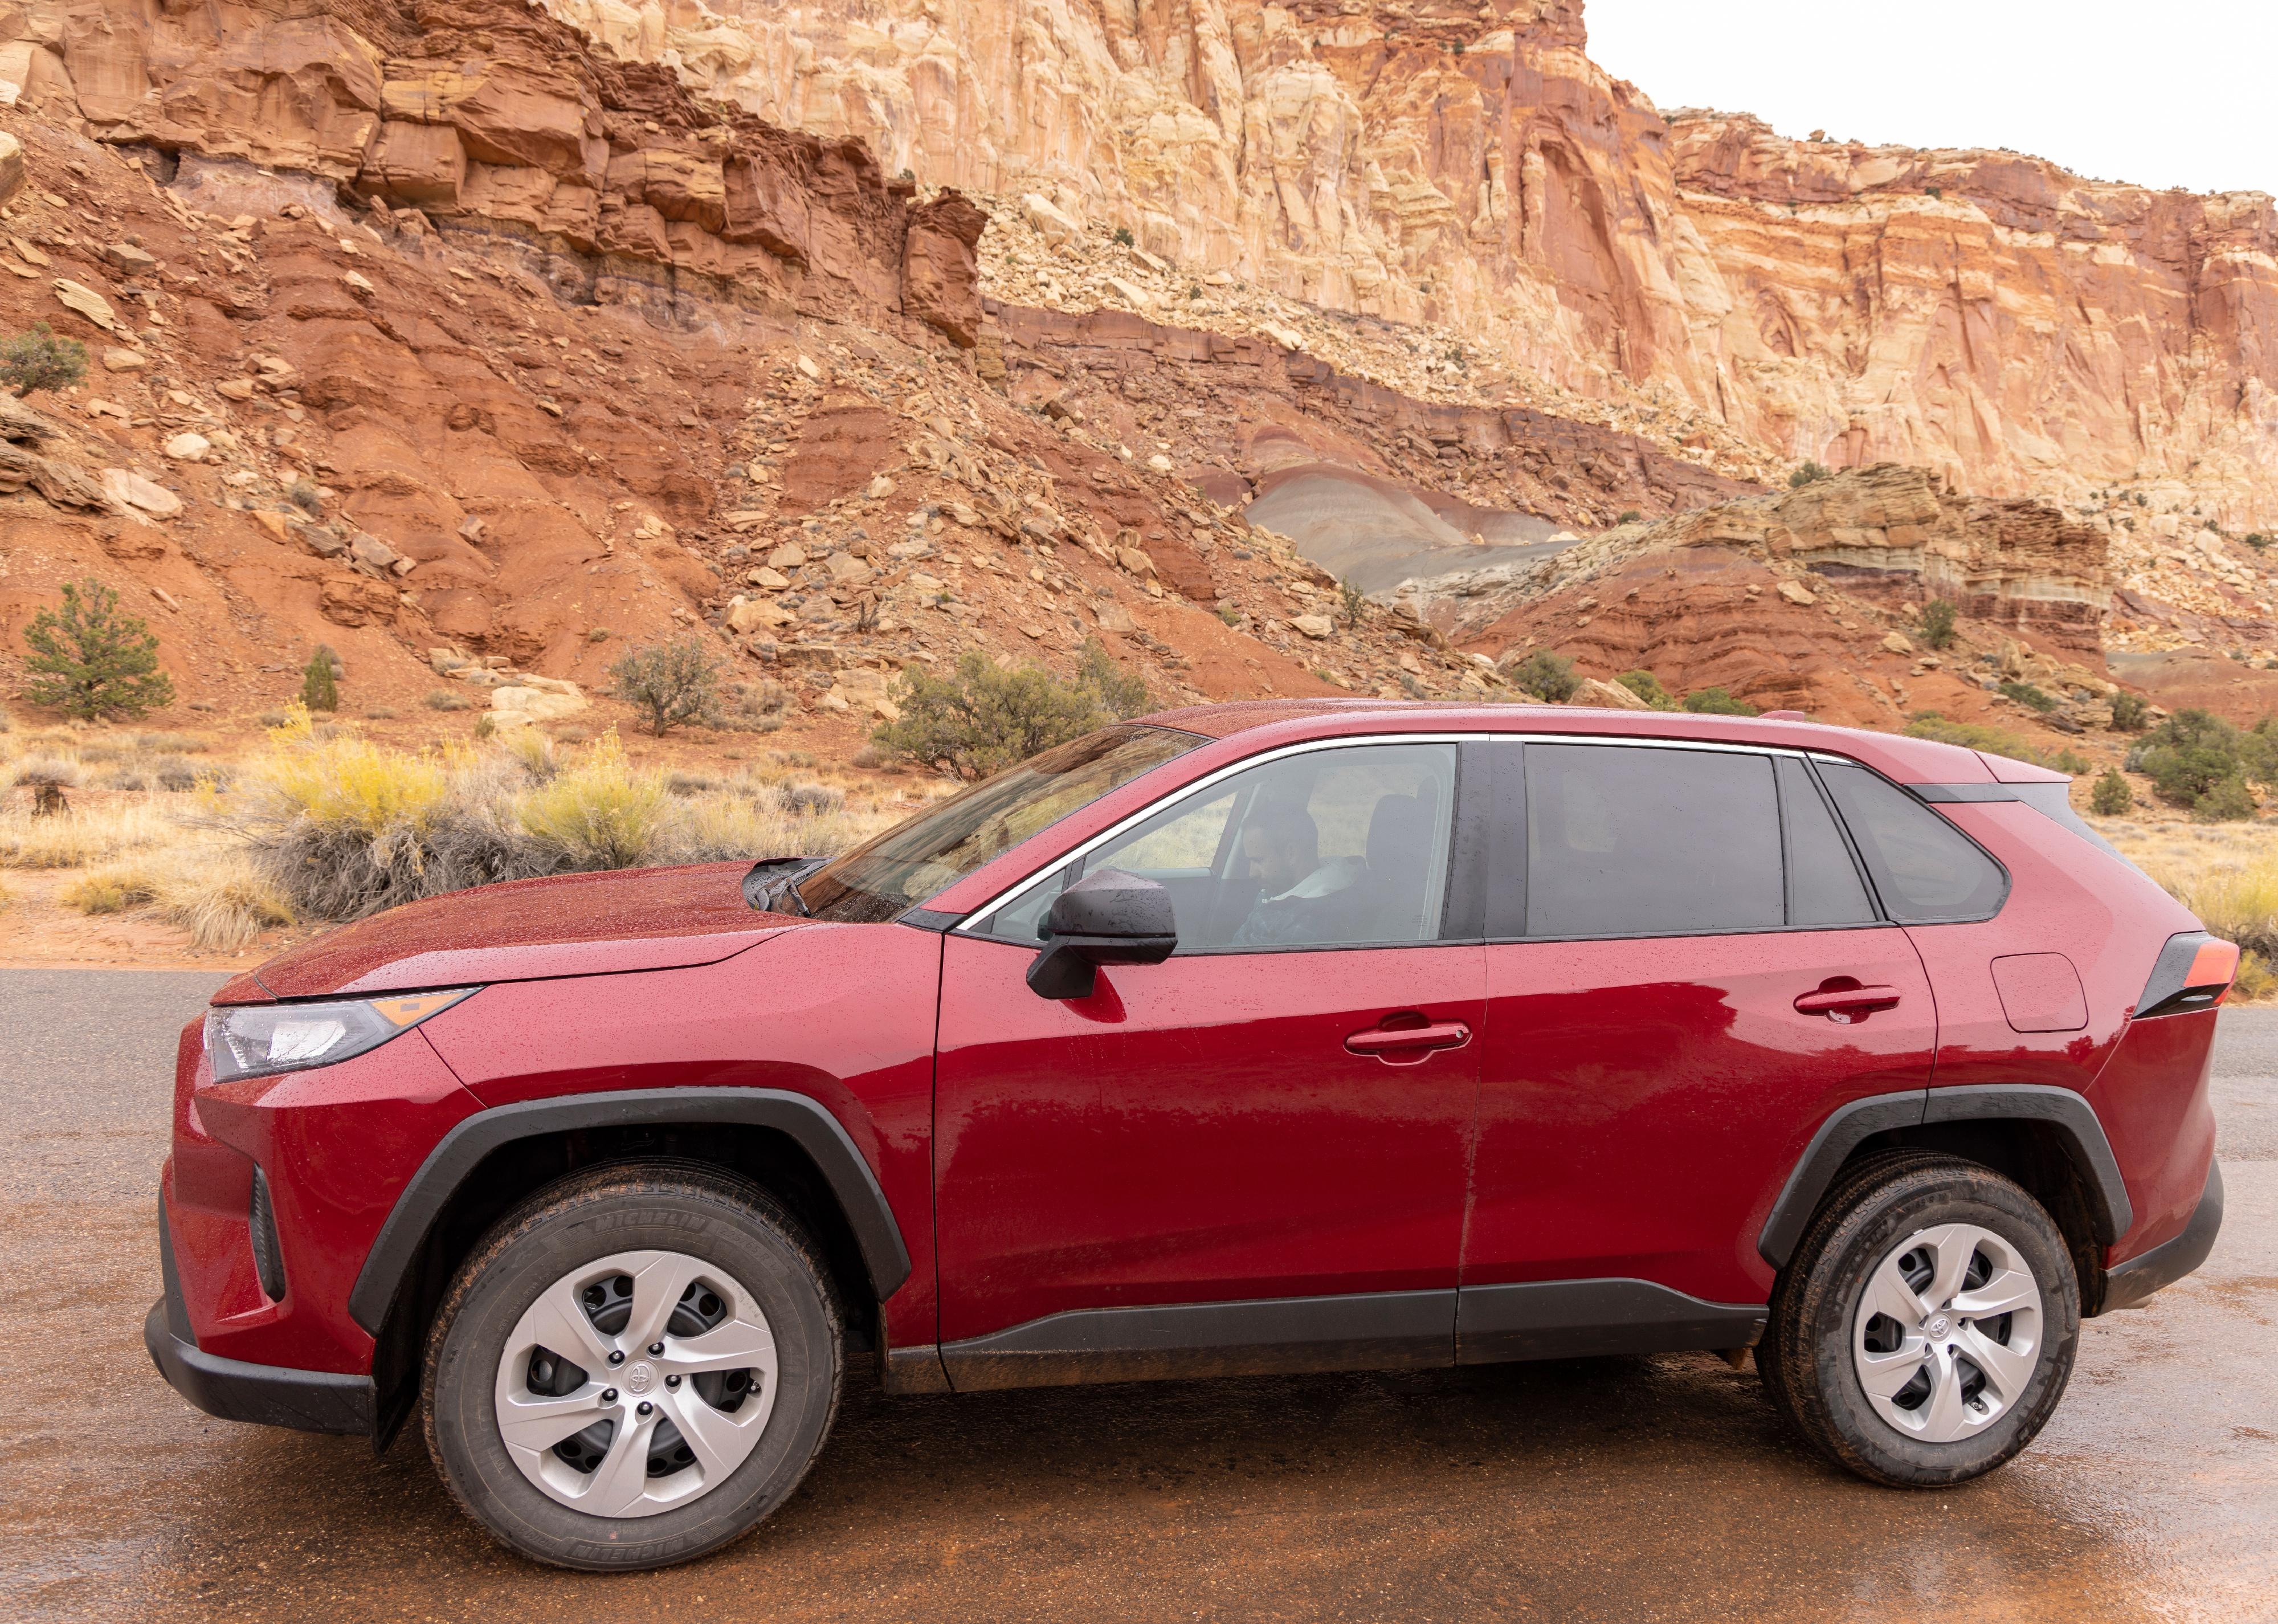 View of a red 2022 Toyota Rav4.